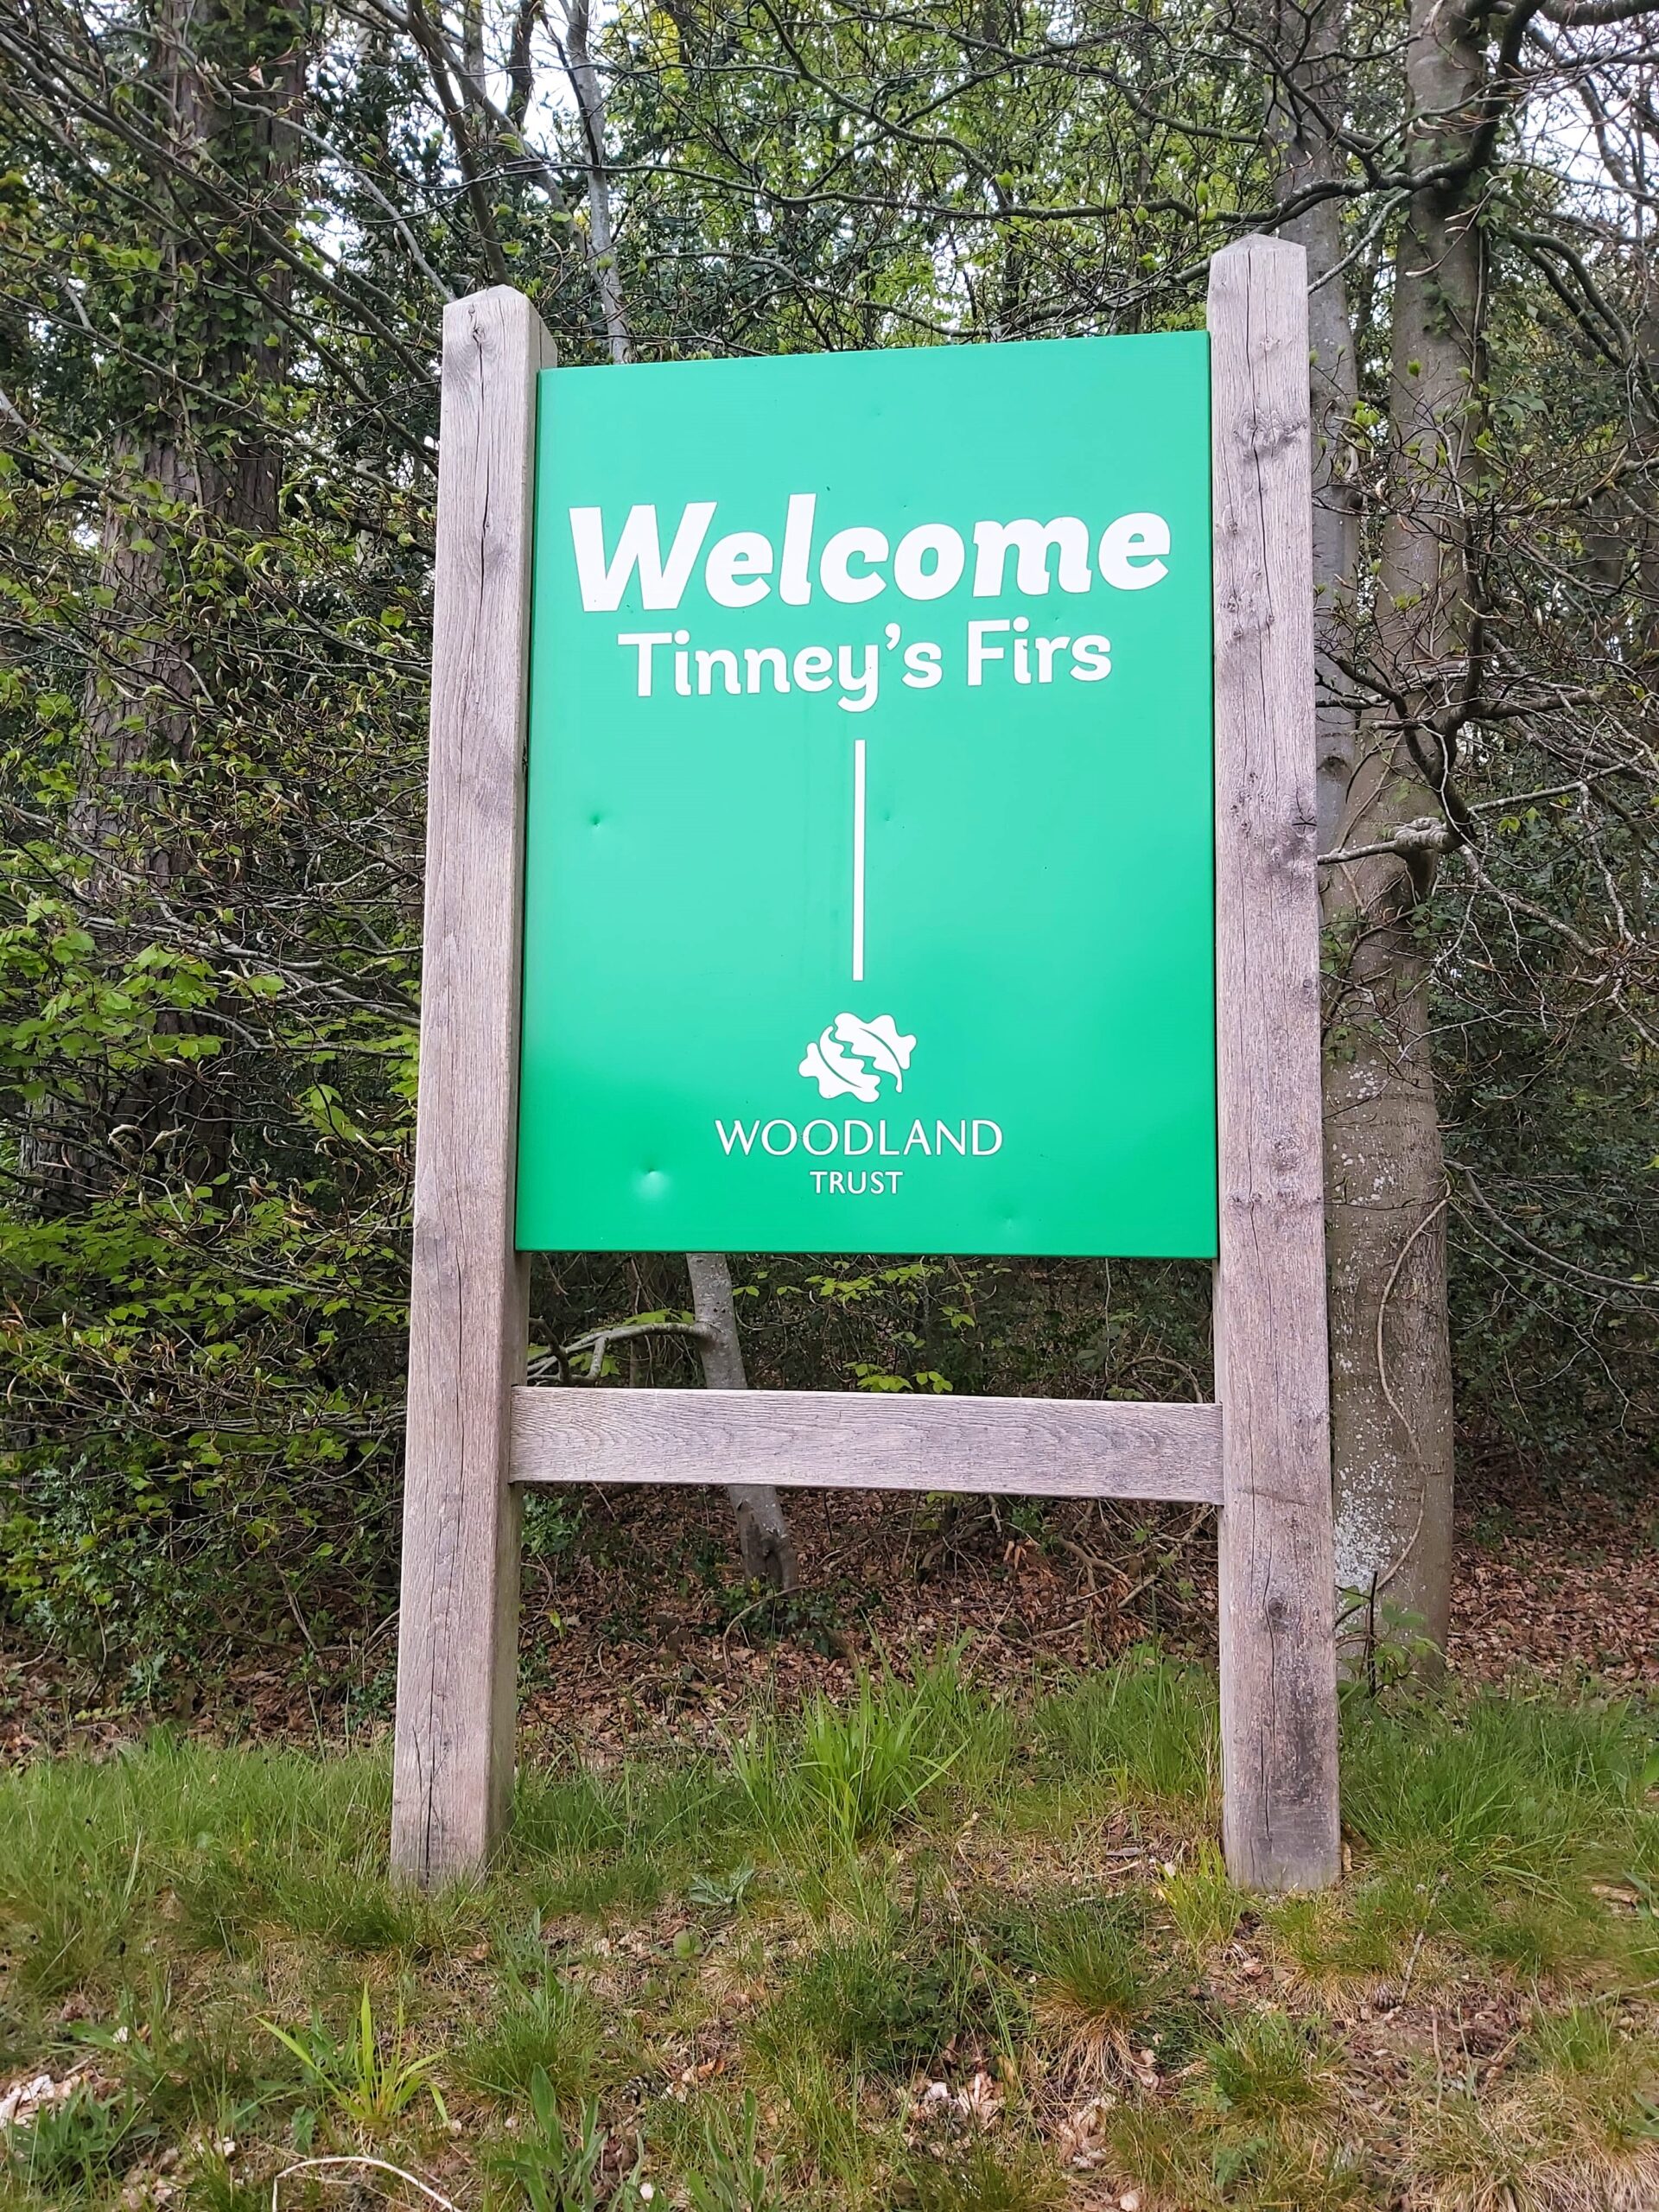 Tinney's Firs green sign, New Forest, England